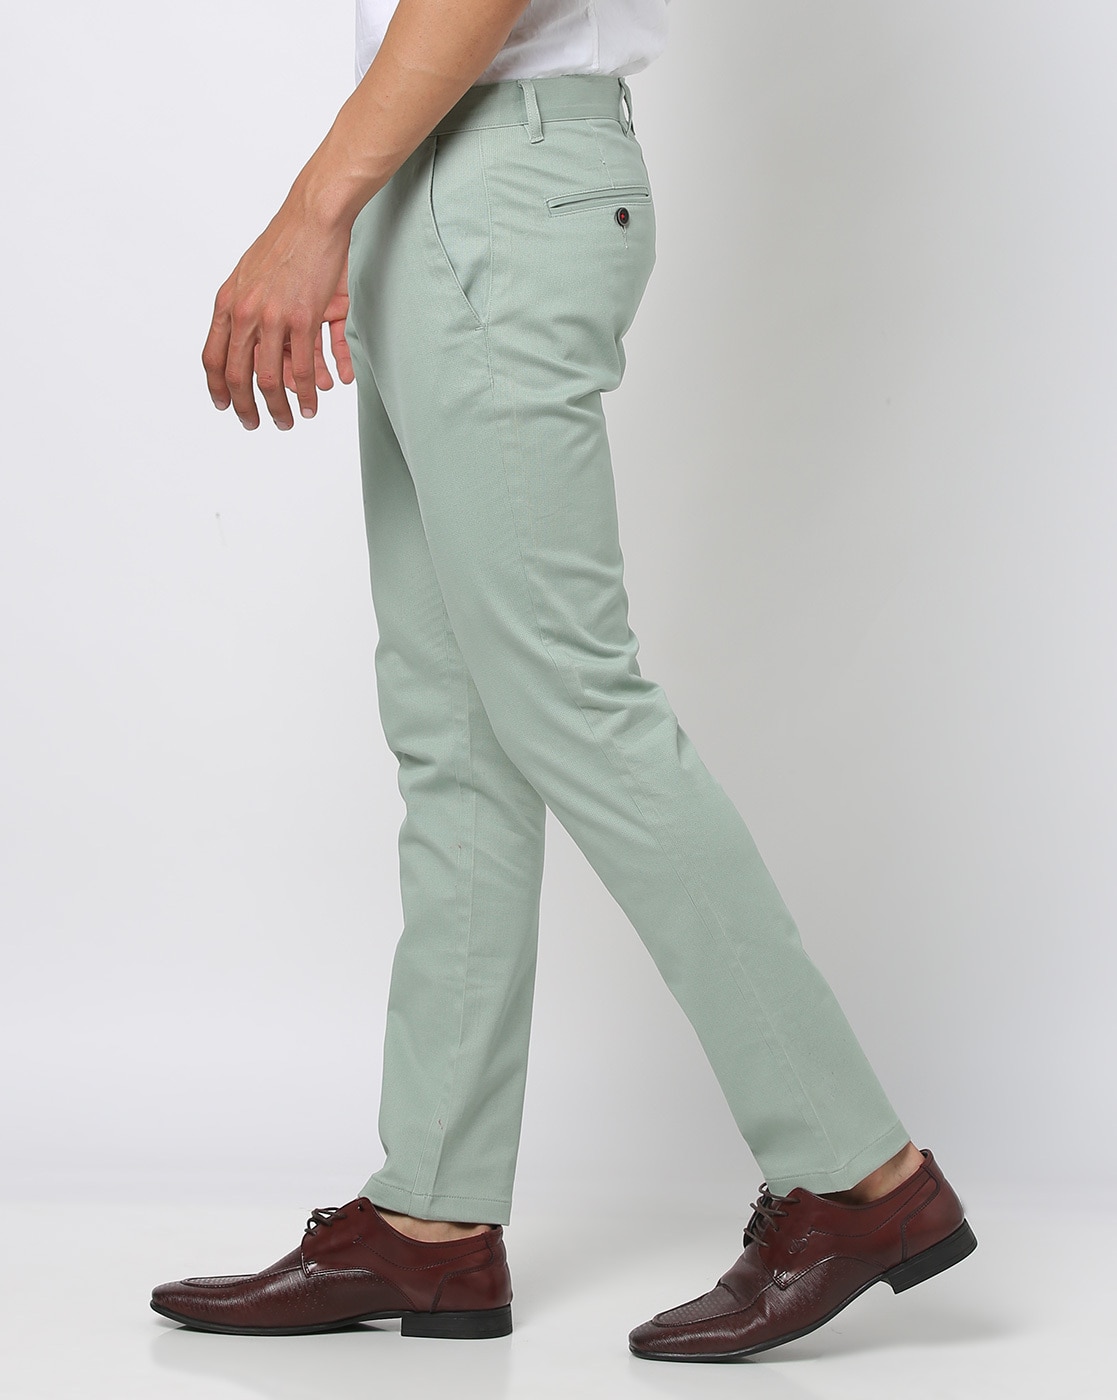 Slim Fit B-91 Casual Light Green Solid Khakis - Cultron